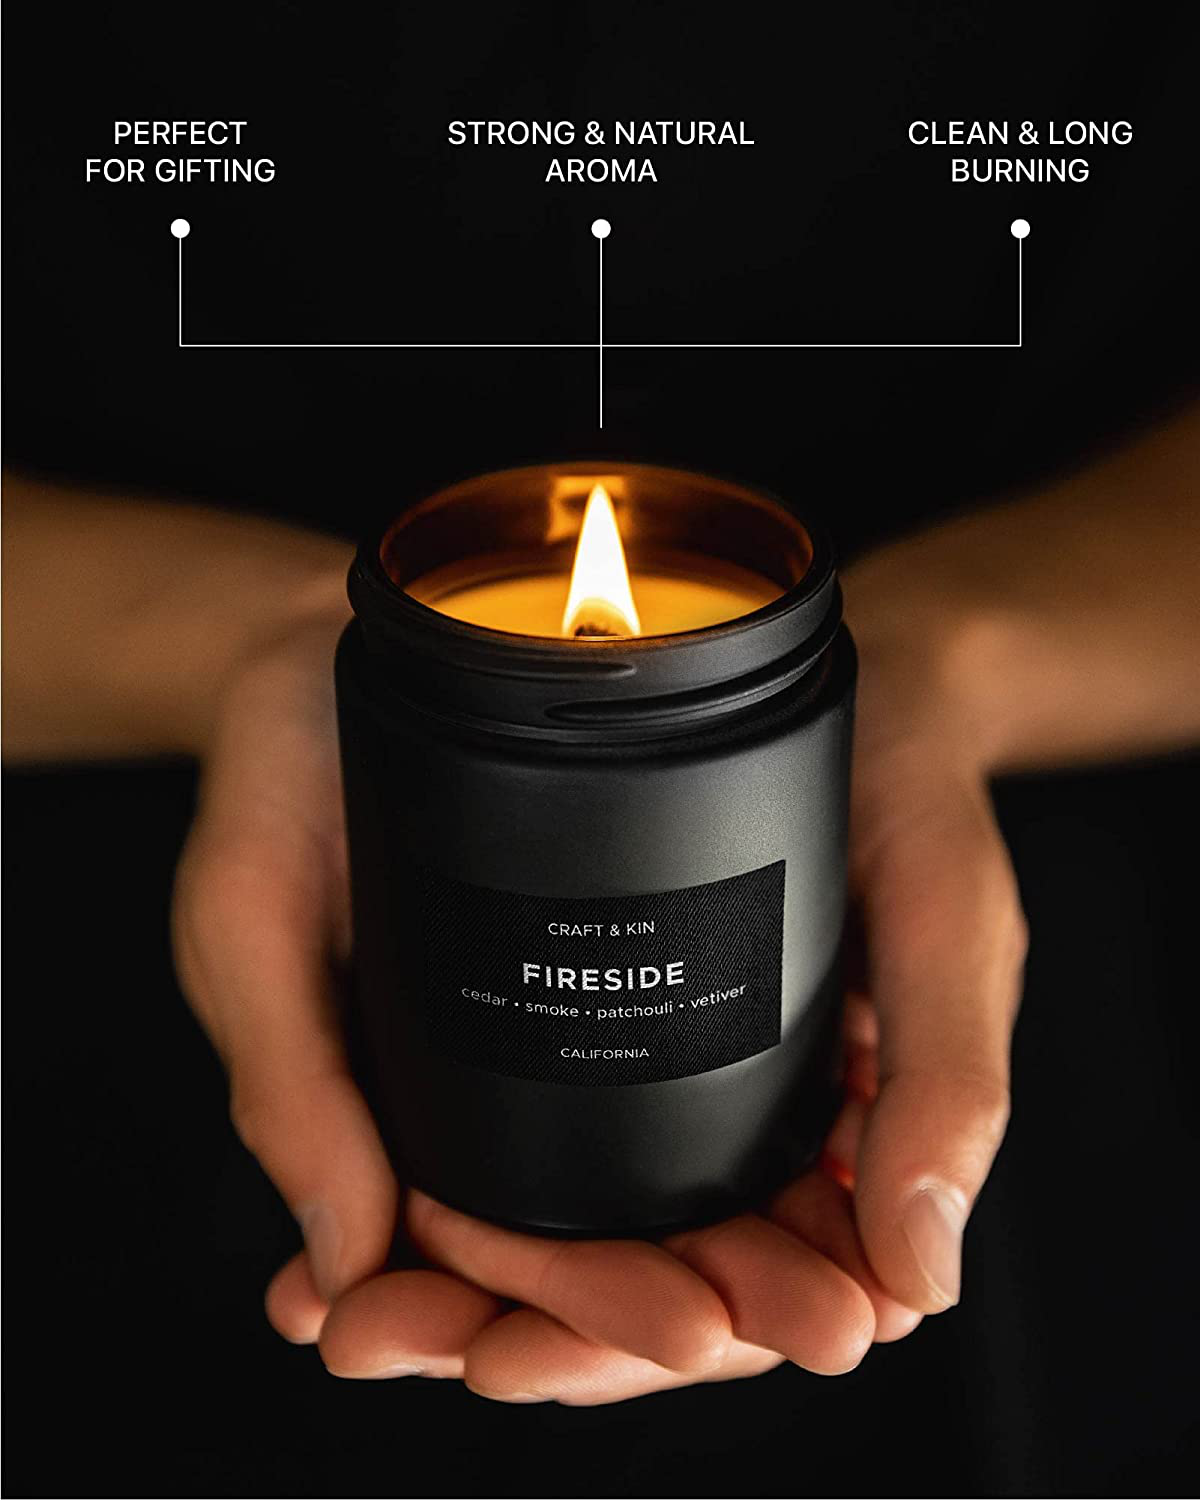 Scented Candles for Men | Smokey Fireside Scented Candle | Soy Candles for Home Scented | Aromatherapy Candle Men Candles | Candle for Men Candles | Long Lasting Candles Masculine Candle in Black Jar